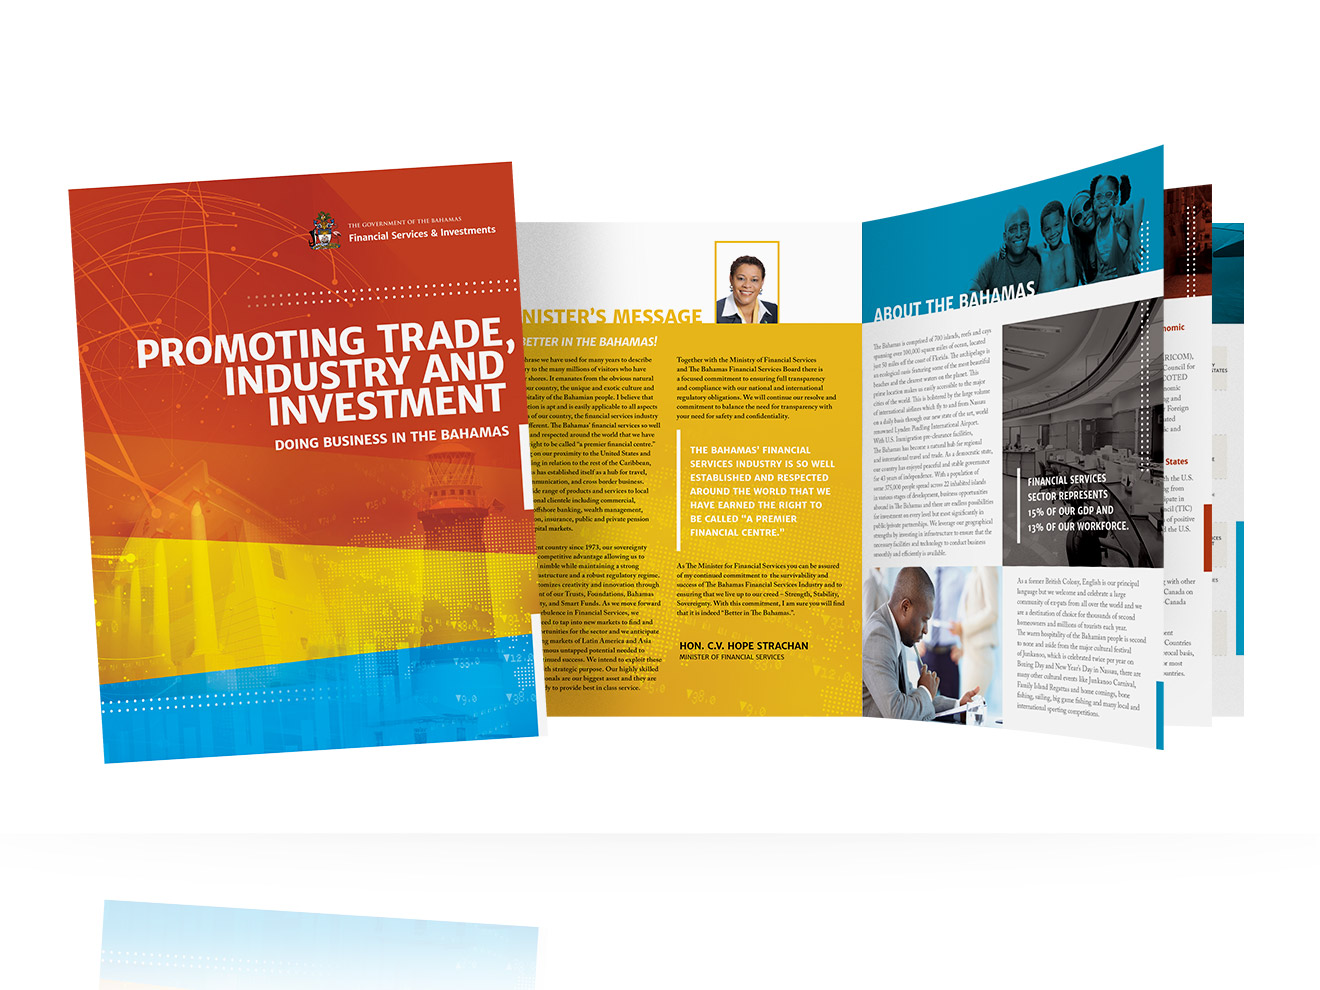 Promoting Trade Industry and Investment booklet interior spread